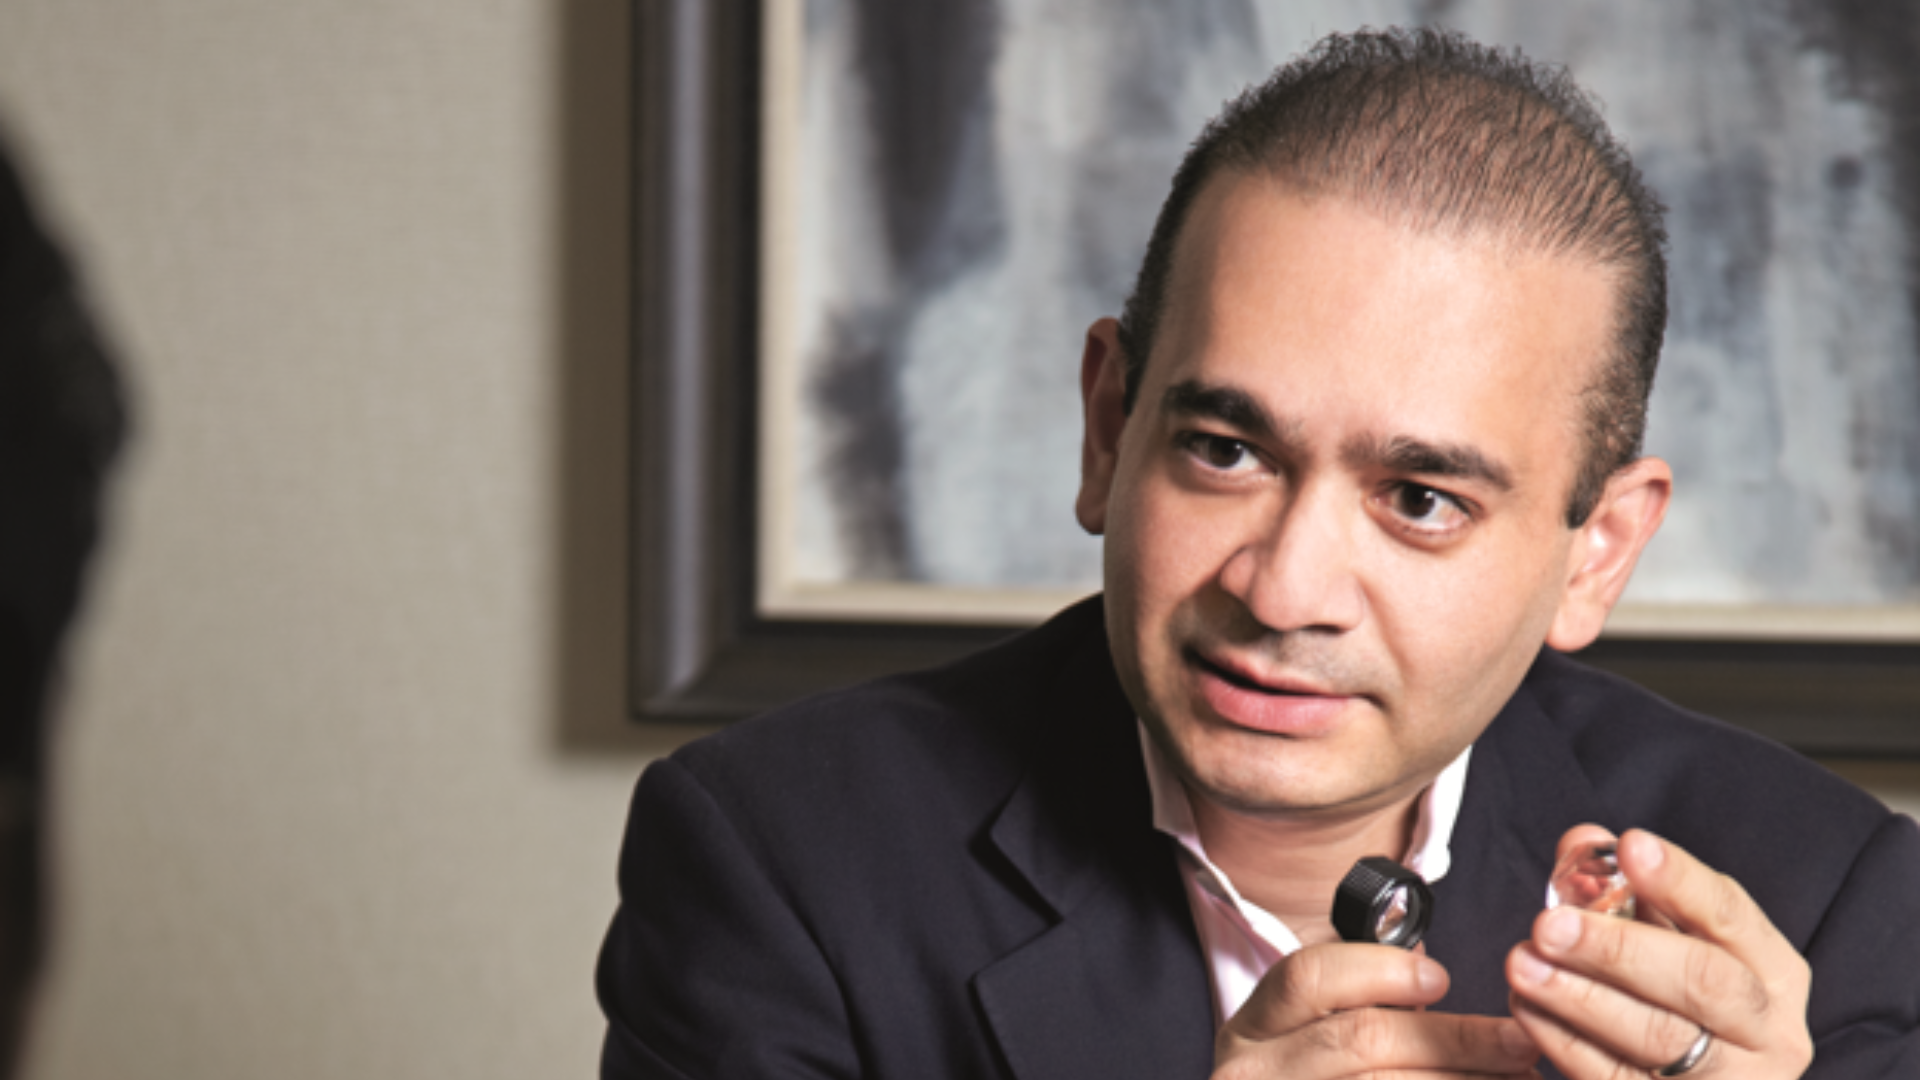 “Reasonable Decision To Allow….”: Nirav Modi’s Upscale London Apartment Sale Approved By UK Court